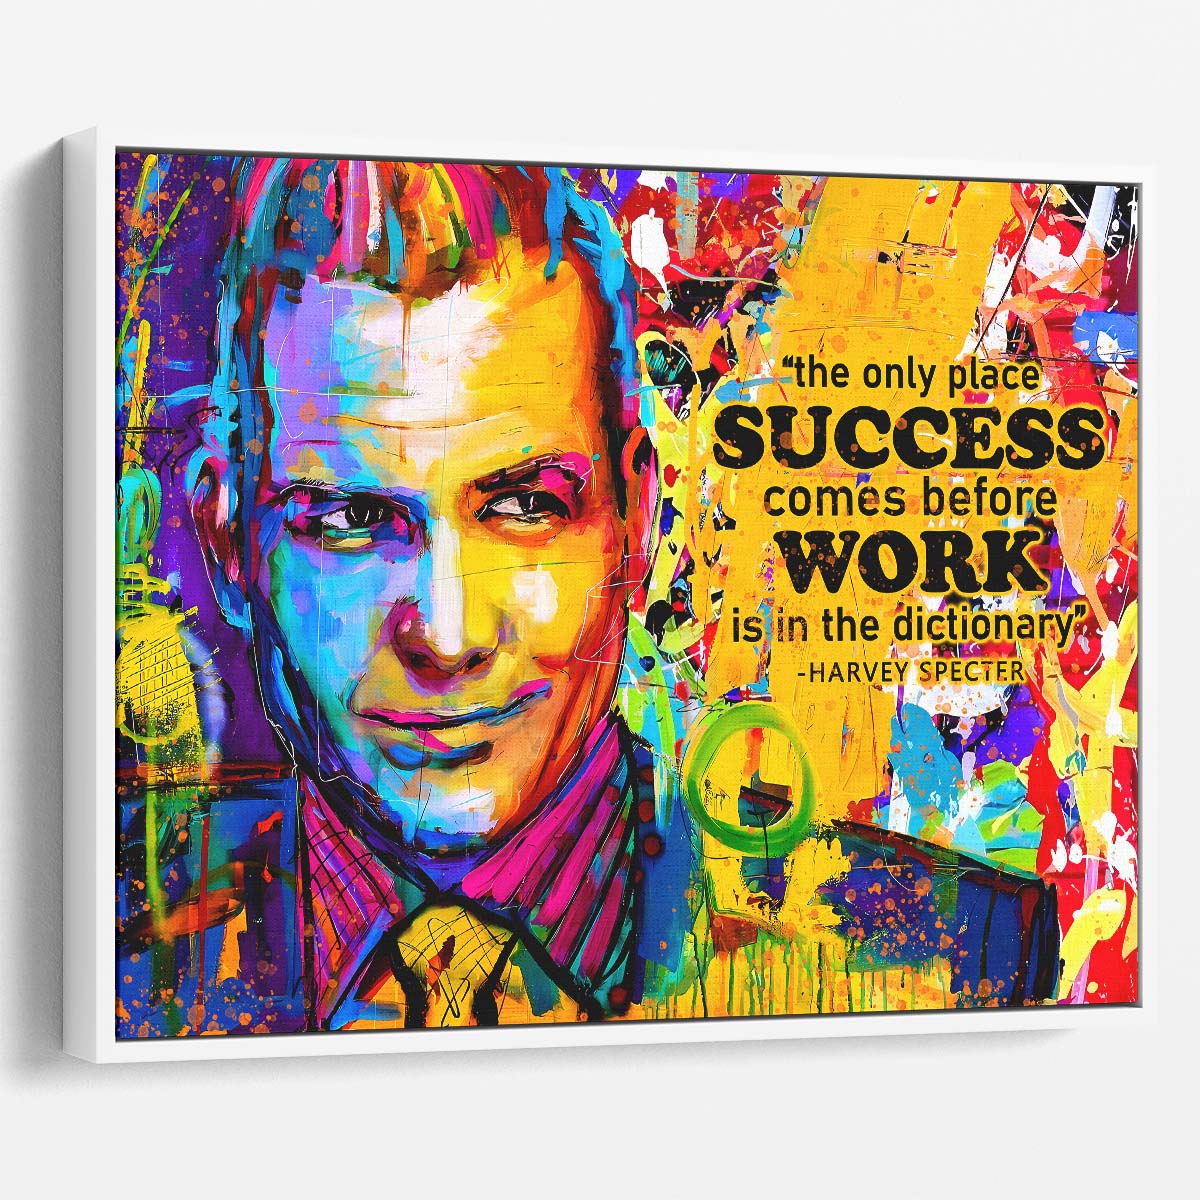 Harvey Specter Success Comes Before Work Quote Graffiti Wall Art by Luxuriance Designs. Made in USA.